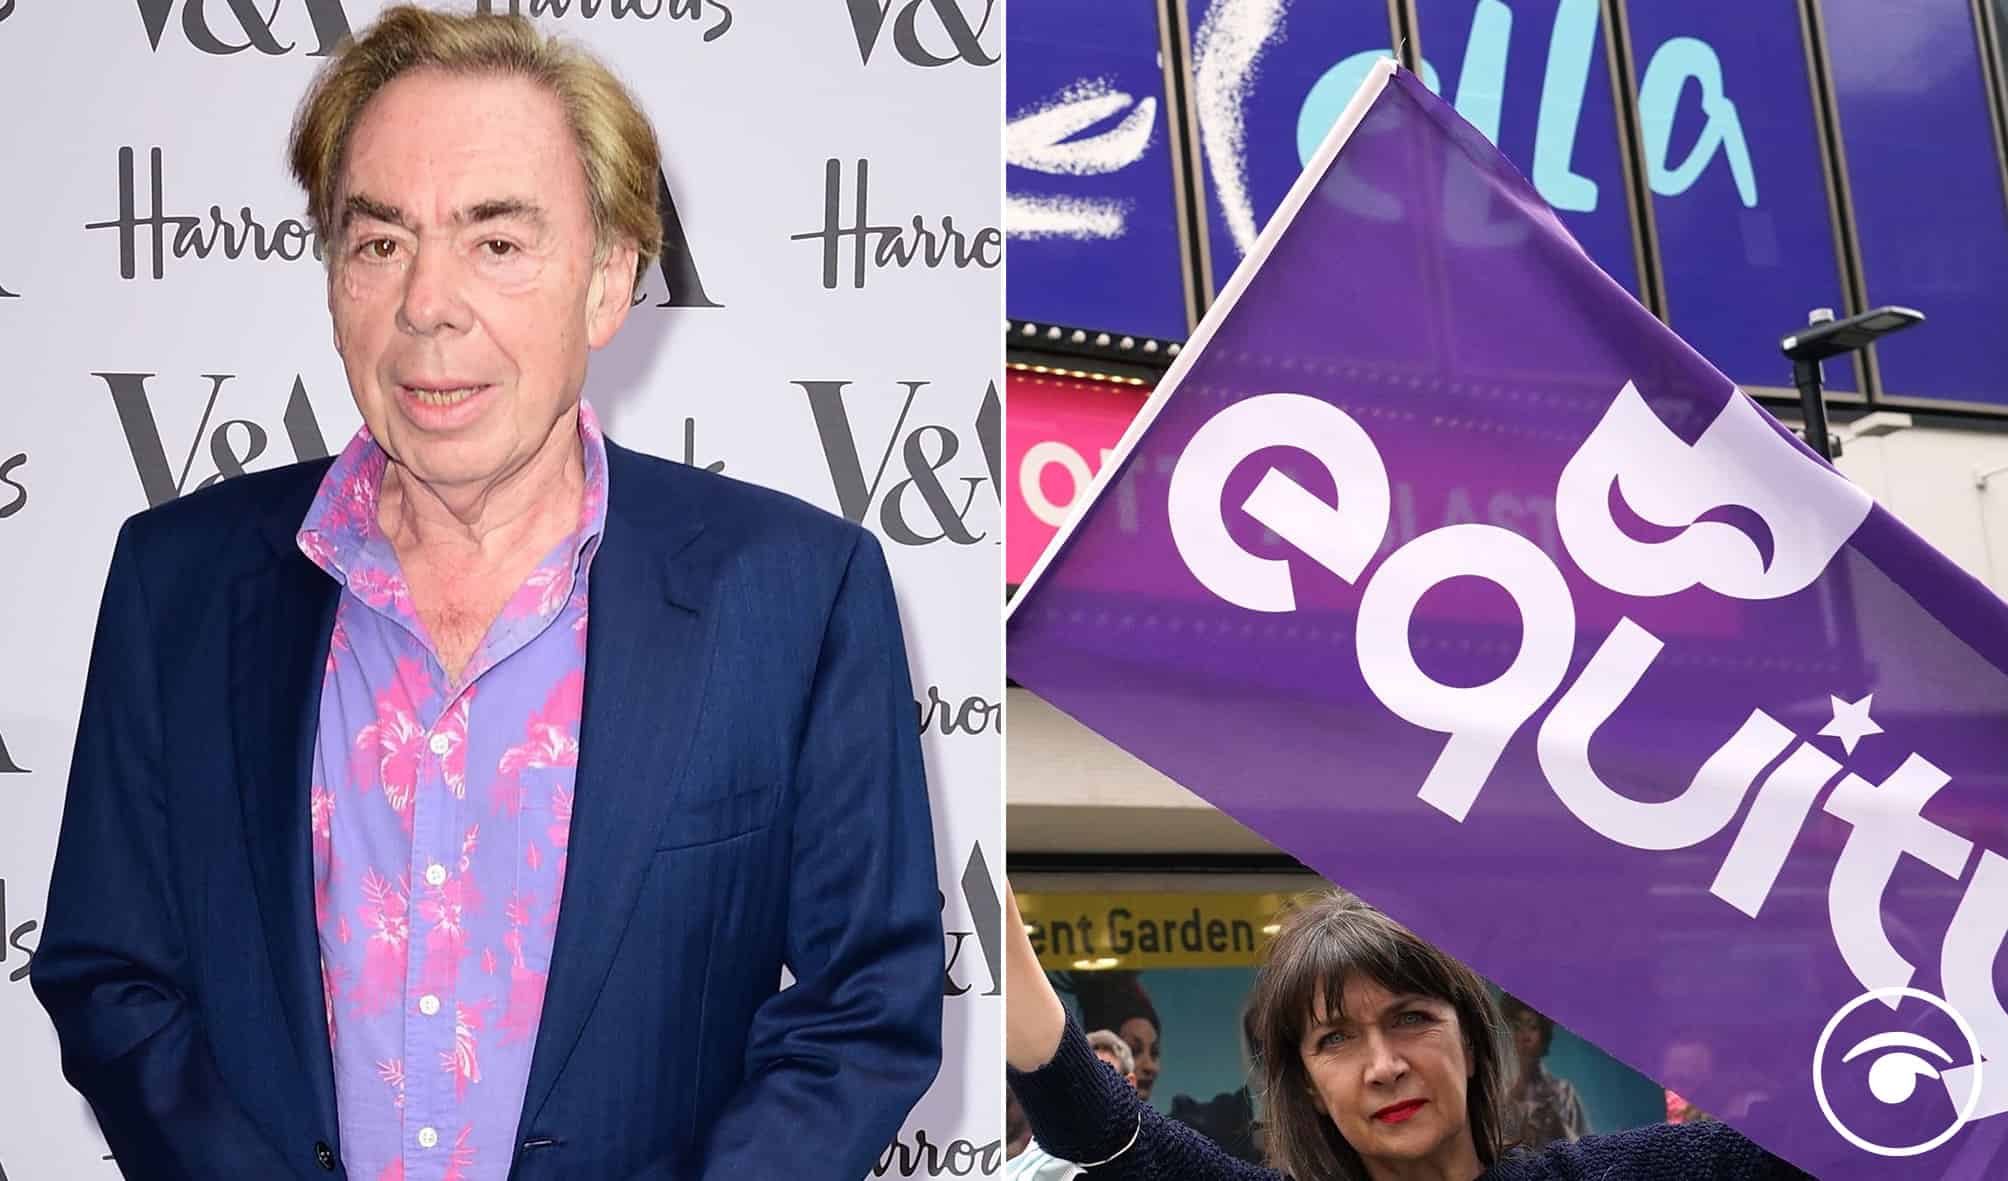 Lloyd Webber who once flew into UK to vote to cut tax credits slammed for closure of Cinderella